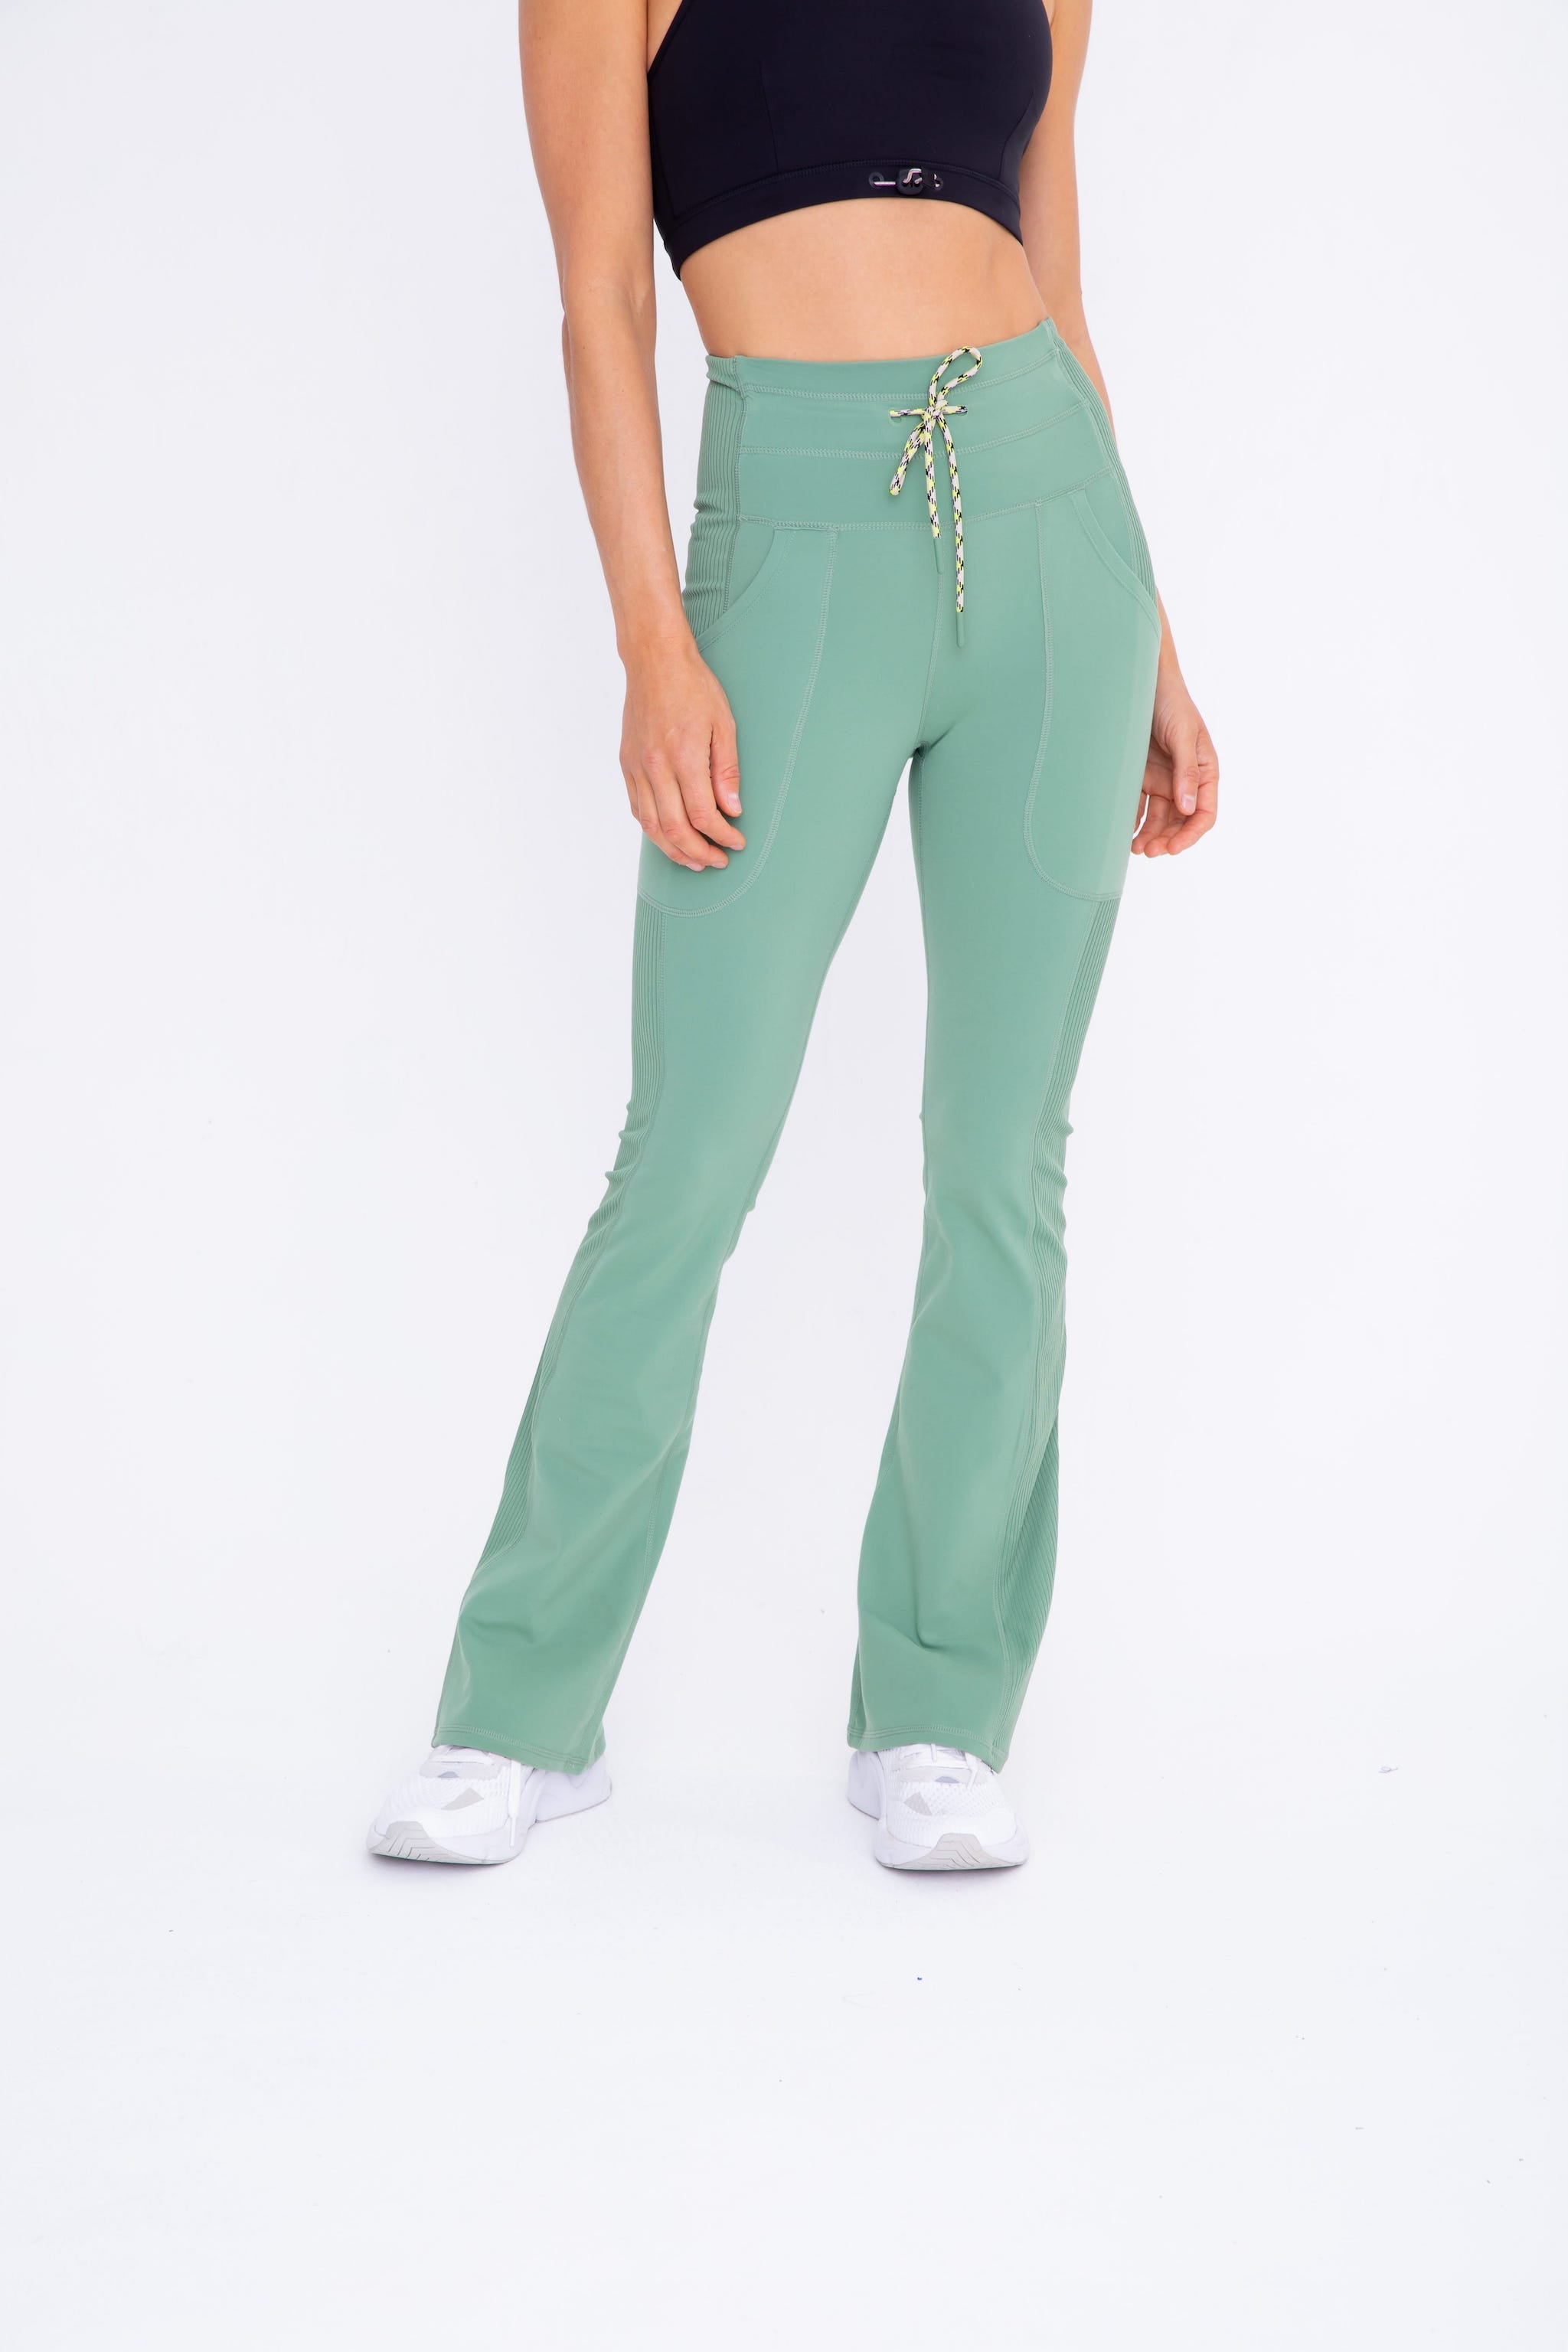 sage green flared legging outfit｜TikTok Search